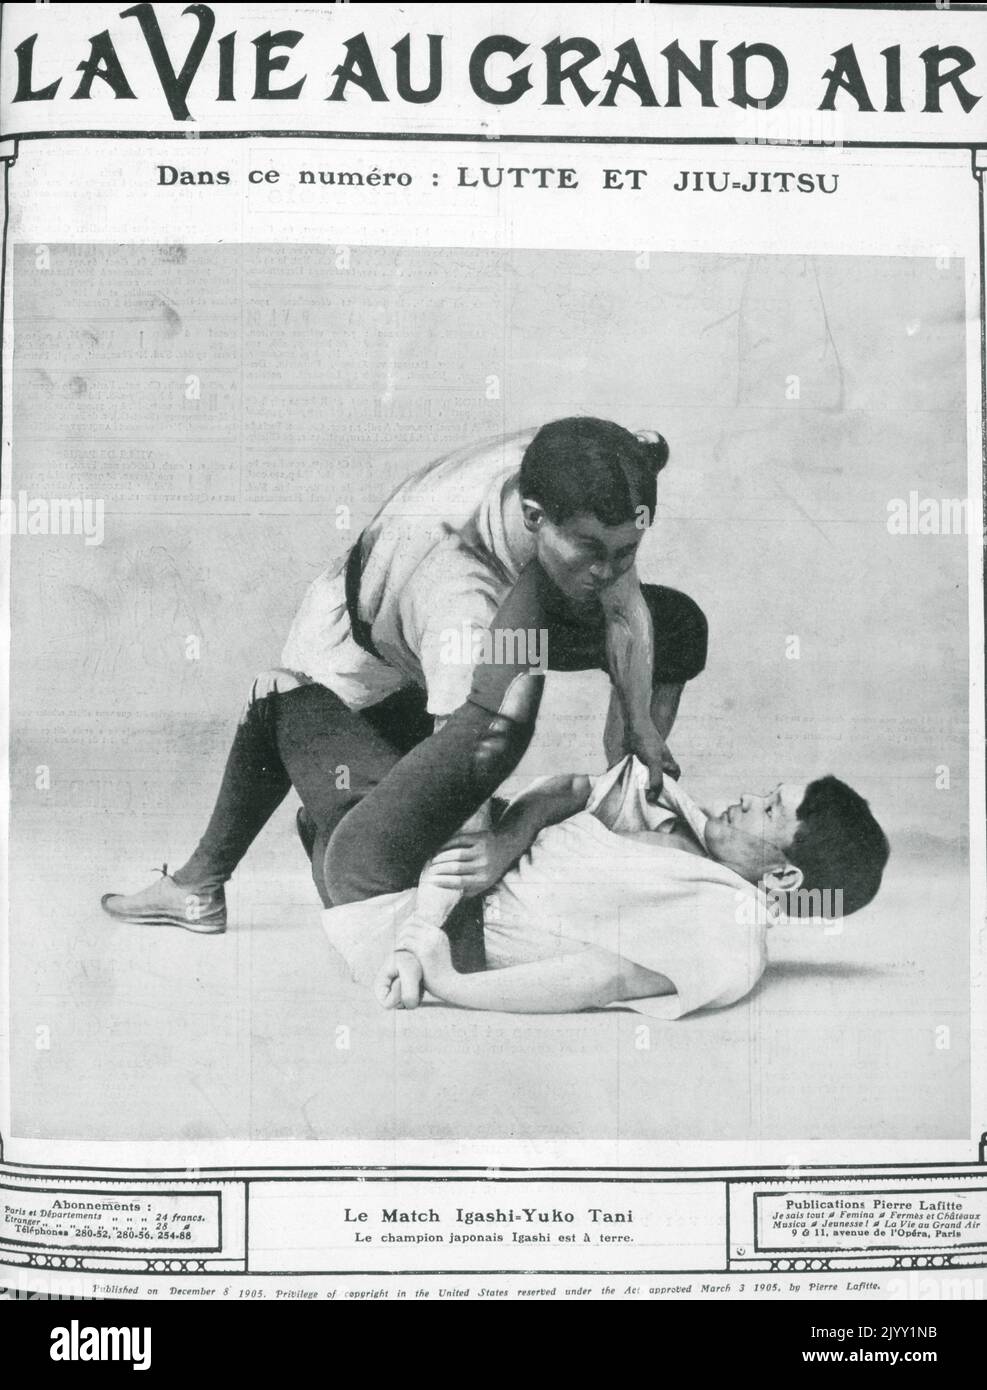 Katsukuma Higashi (on floor) and Yukio Tani (on top), during their controversial 29 November, 1905 jiu-jitsu match, in Paris. The Tani Higashi match, ended in a near-riot, leading to talk of French authorities banning similar contests in the future. Stock Photo